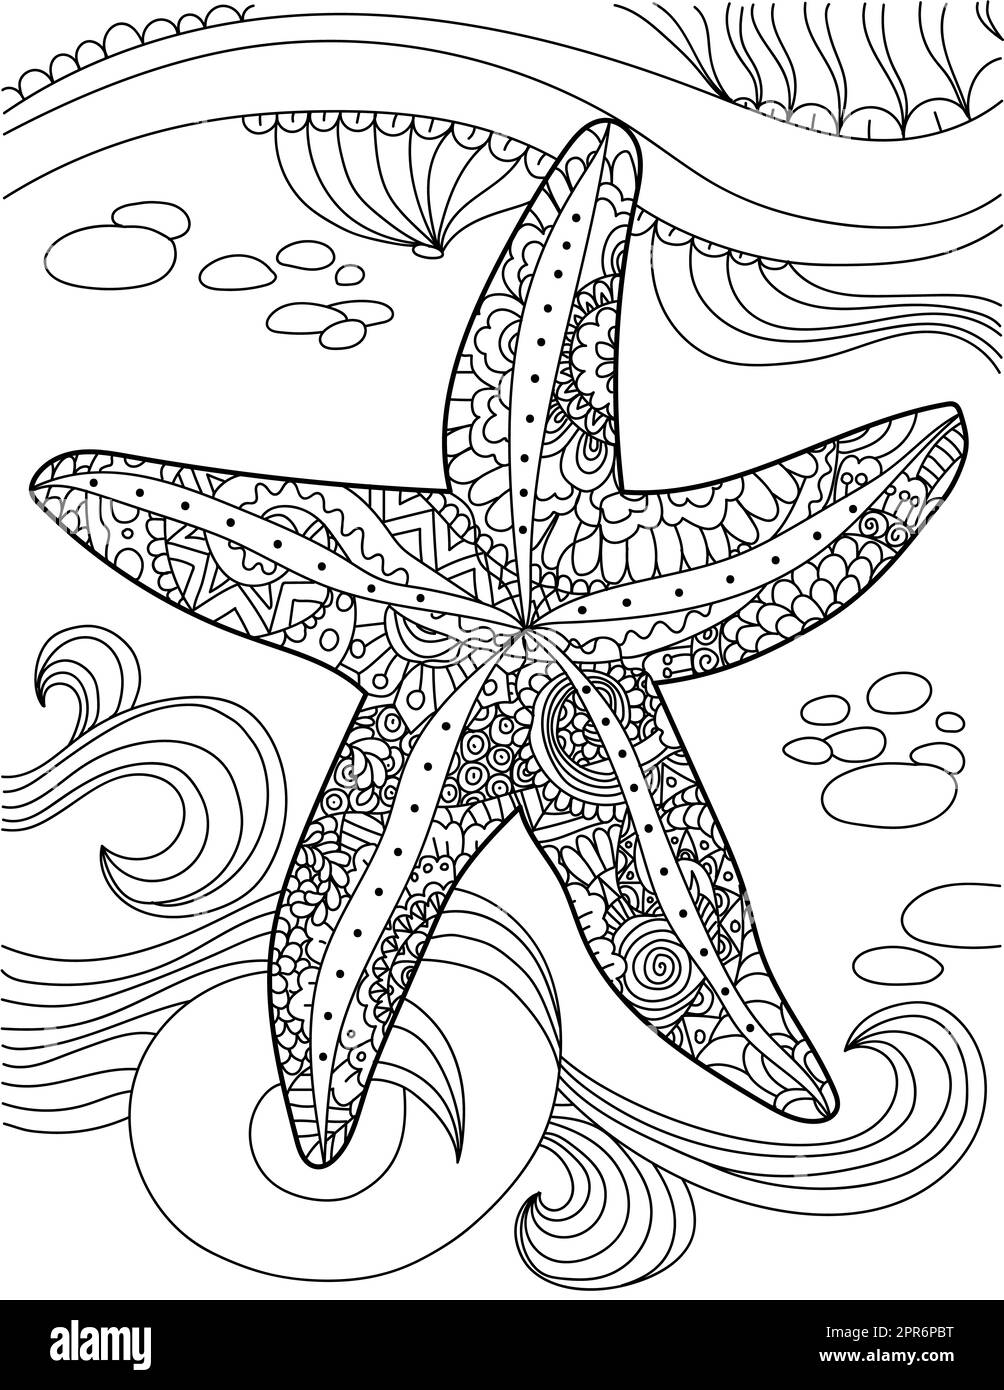 Large Starfish Top View Under Water With Ocean Waves Line Drawing. Stock Photo